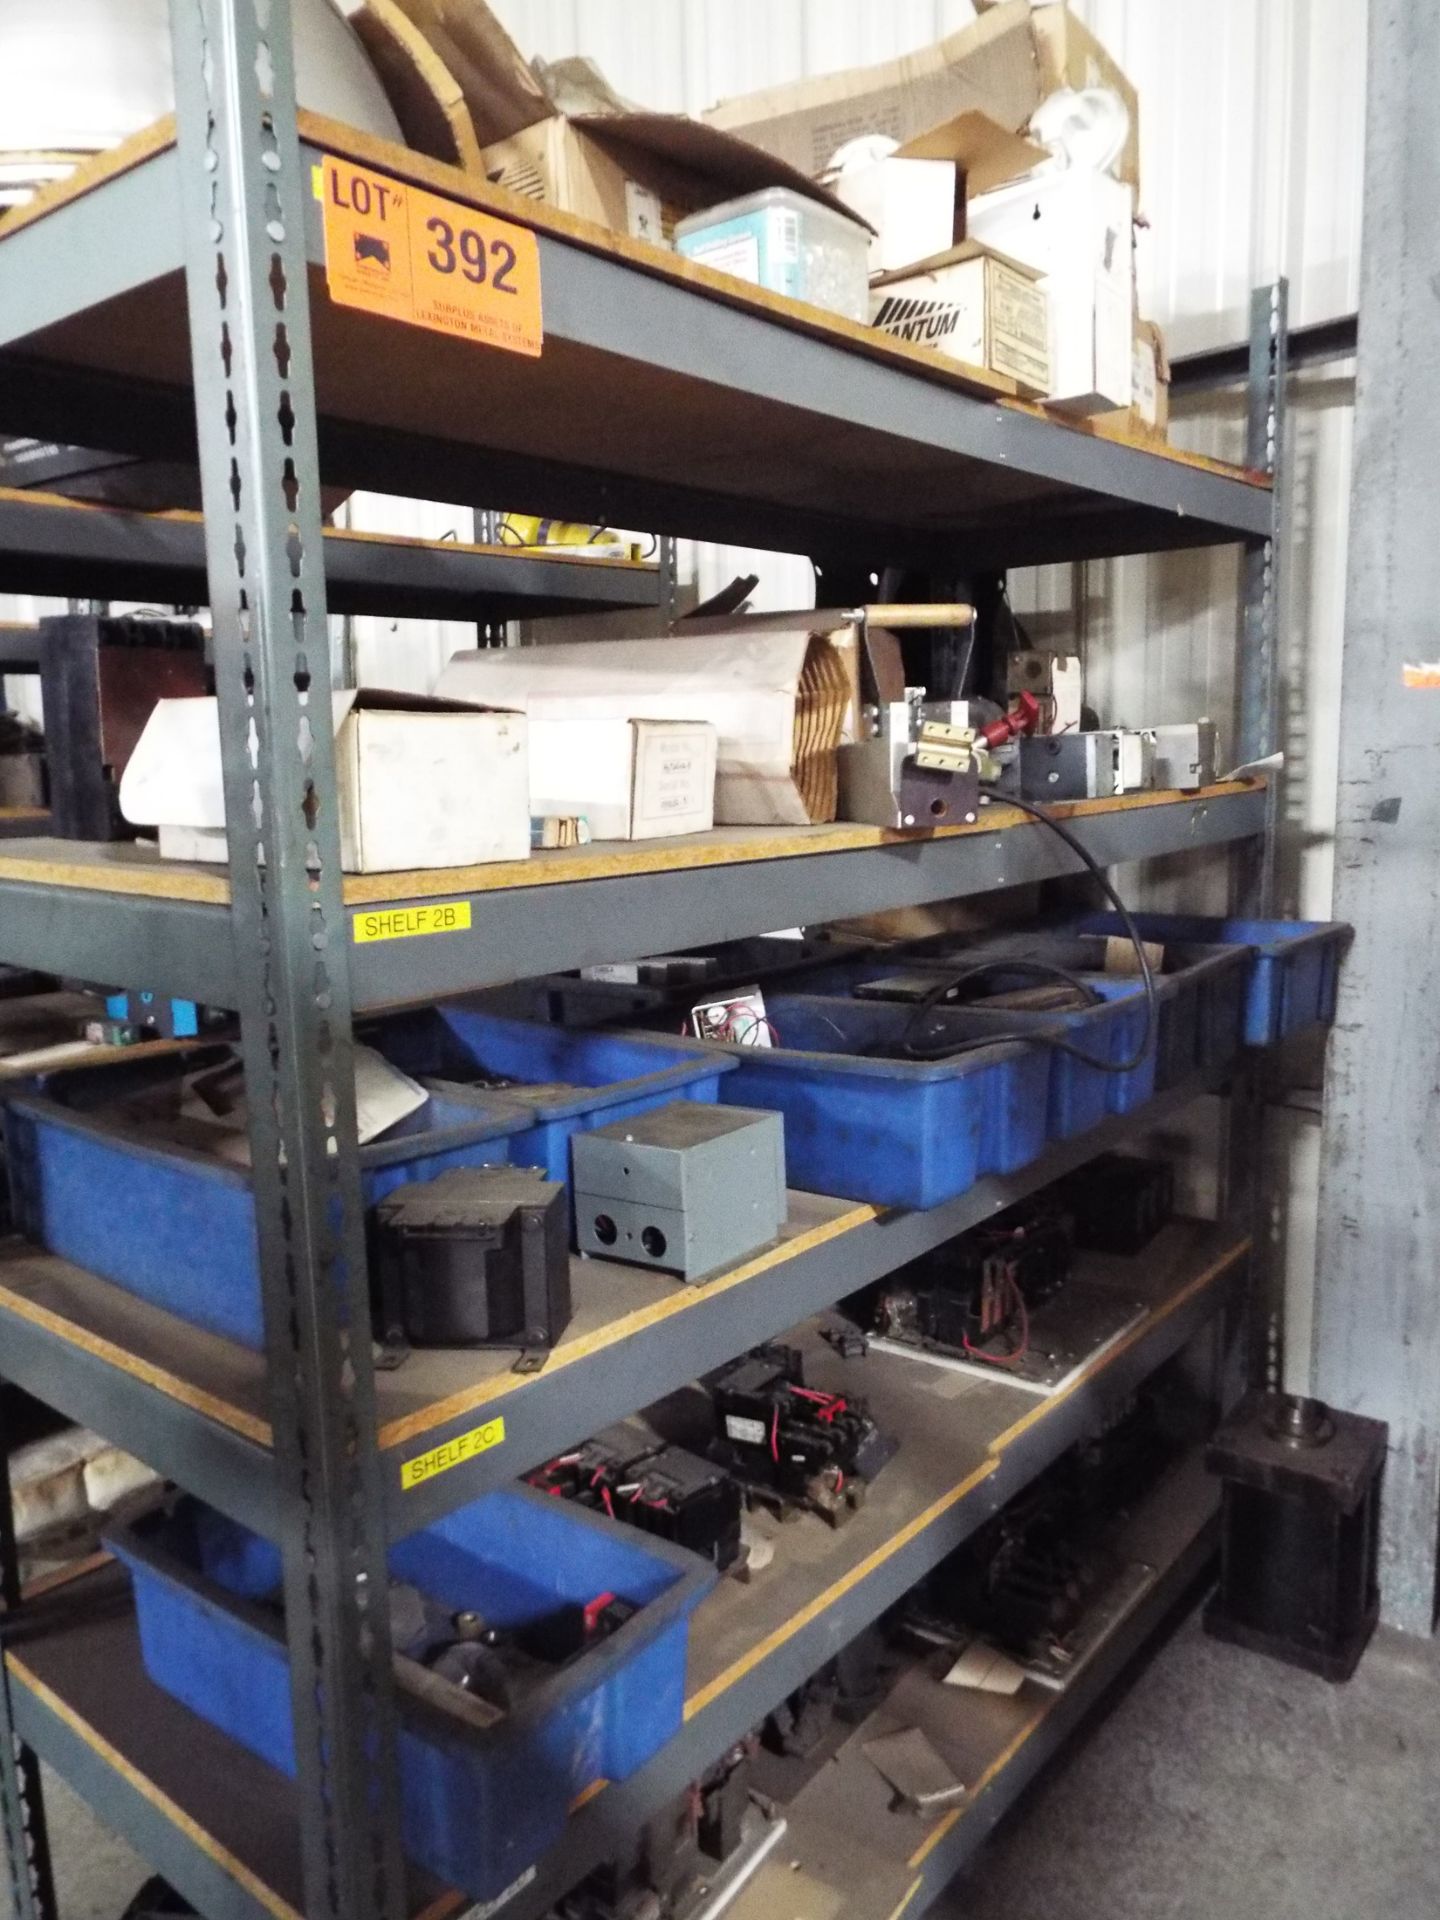 LOT/ SHELF WITH CONTENTS - ELECTRICAL COMPONENTS, BREAKERS, WIRES, PLC COMPONENTS, SPARE PARTS